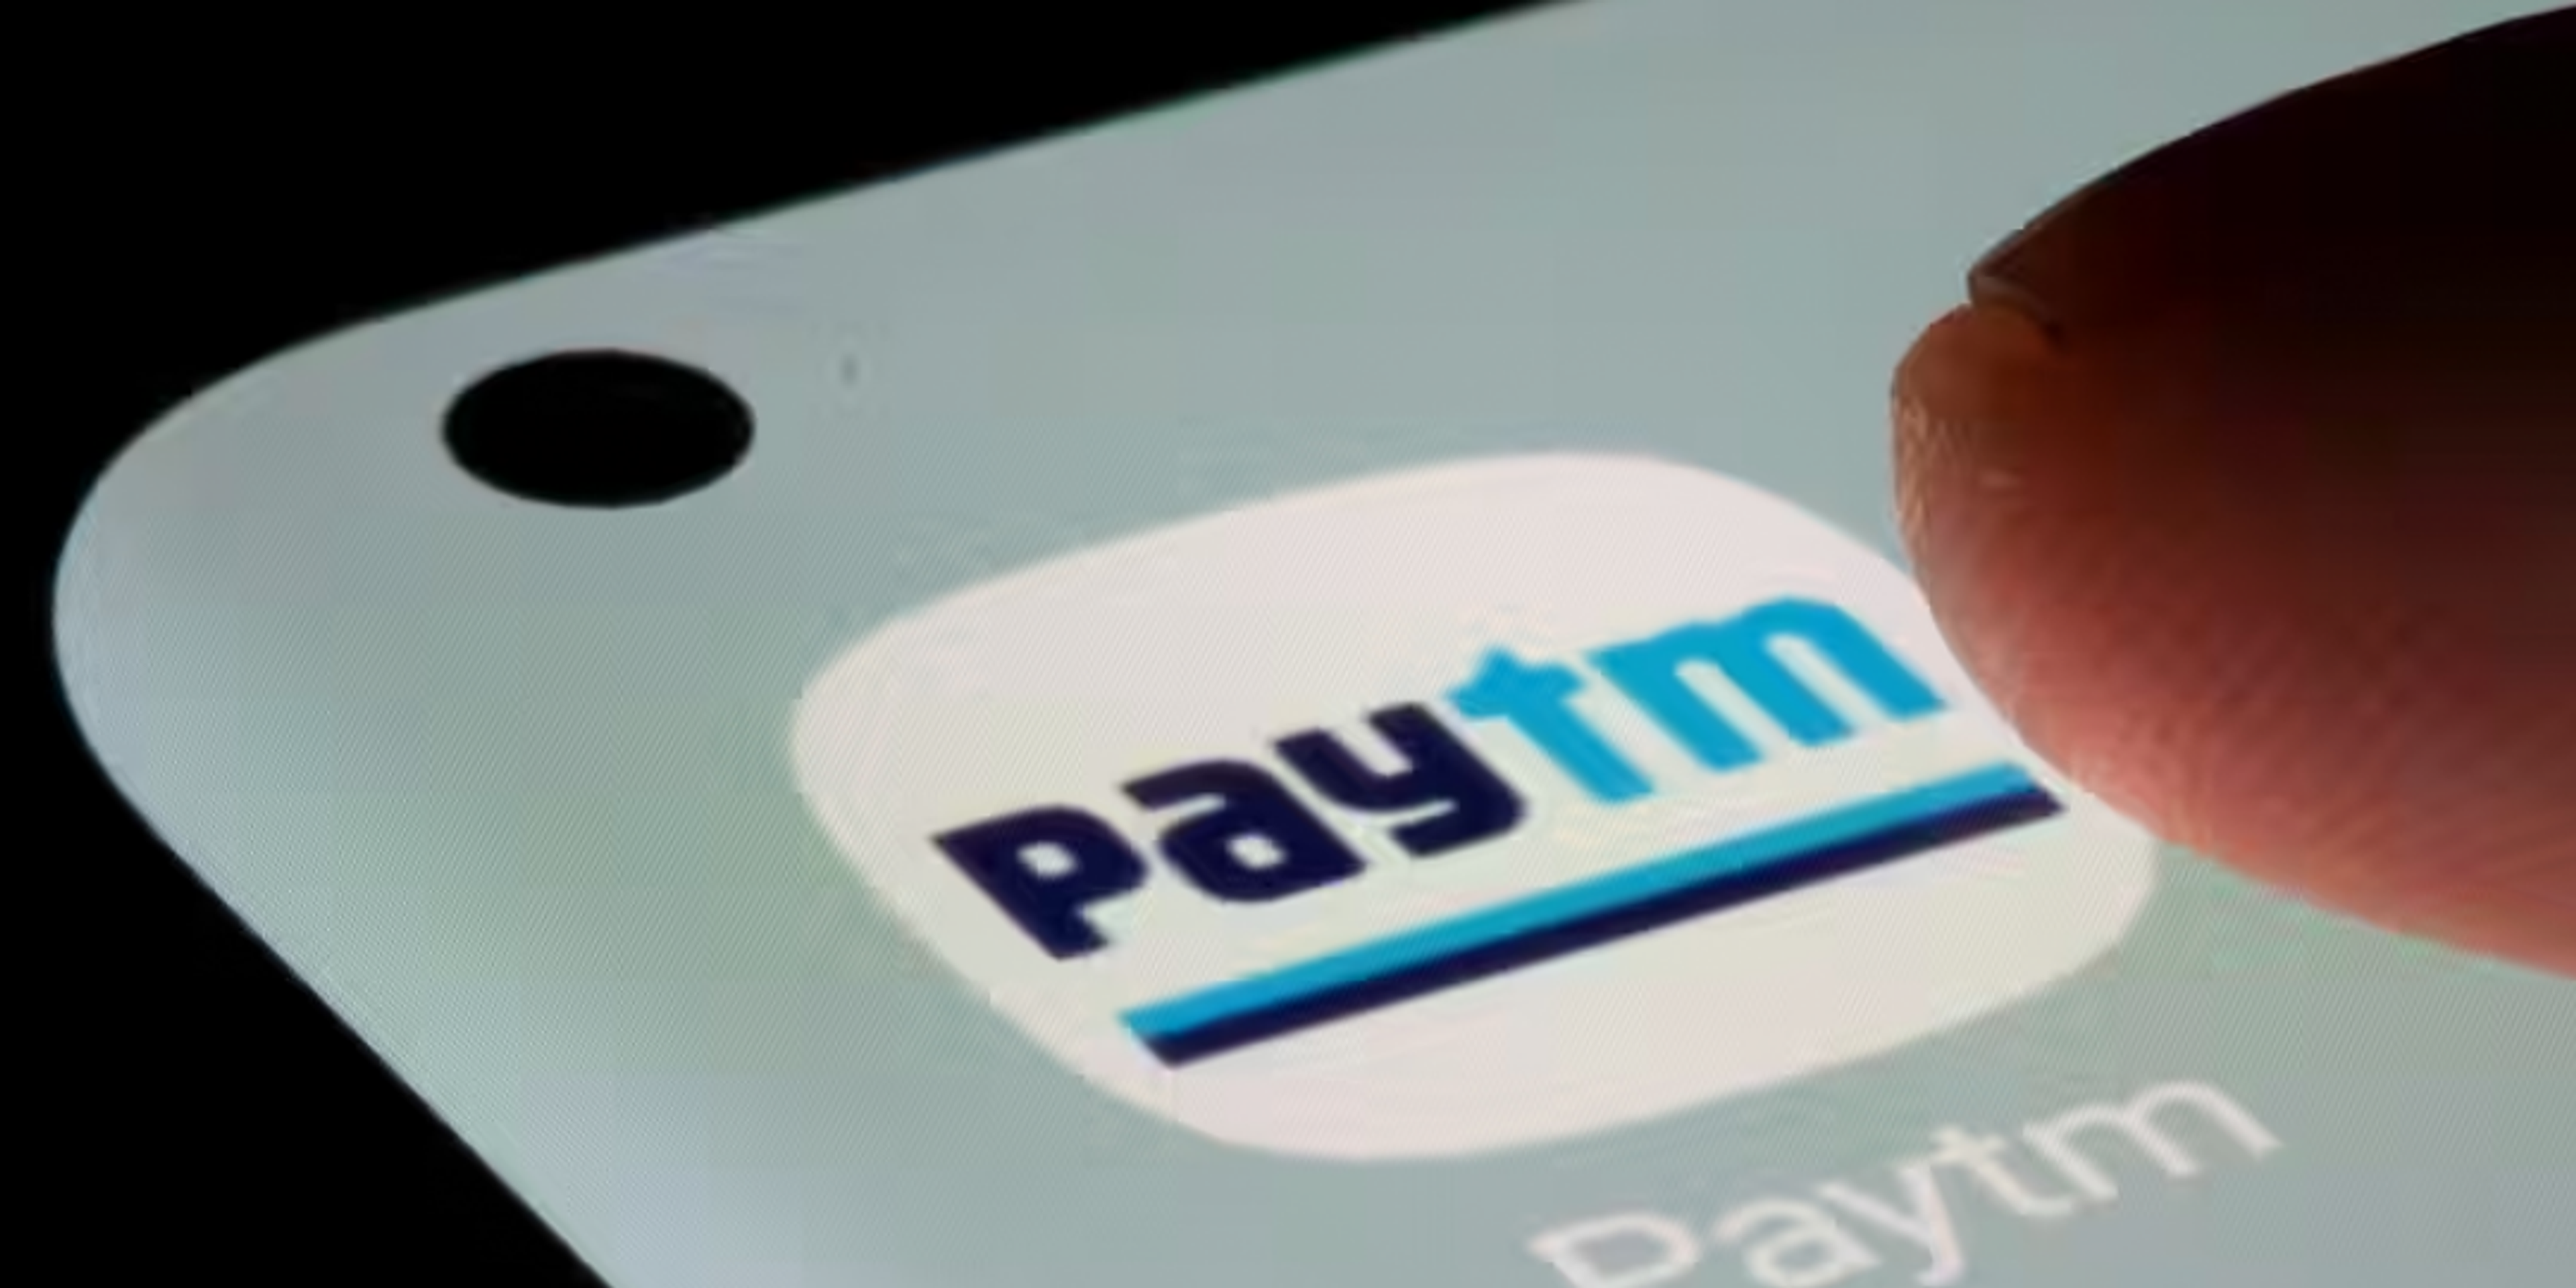 Image of a person clicking on Paytm icon on a phone, Text on top describing the fall of Paytm stock price below 400 rupees.